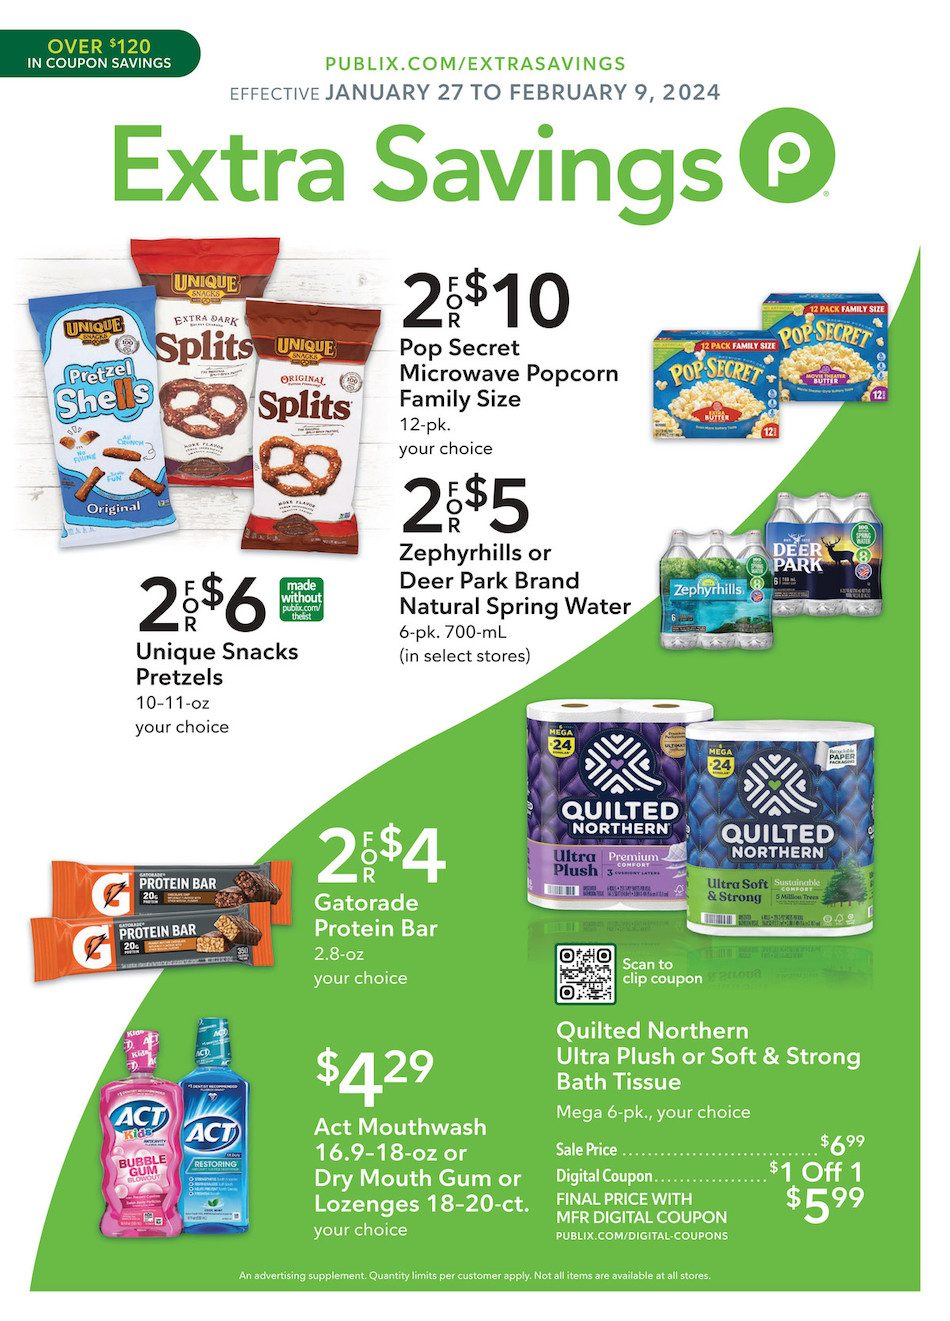 Publix Ad Extra Savings 27th January – 9th February 2024 Page 1